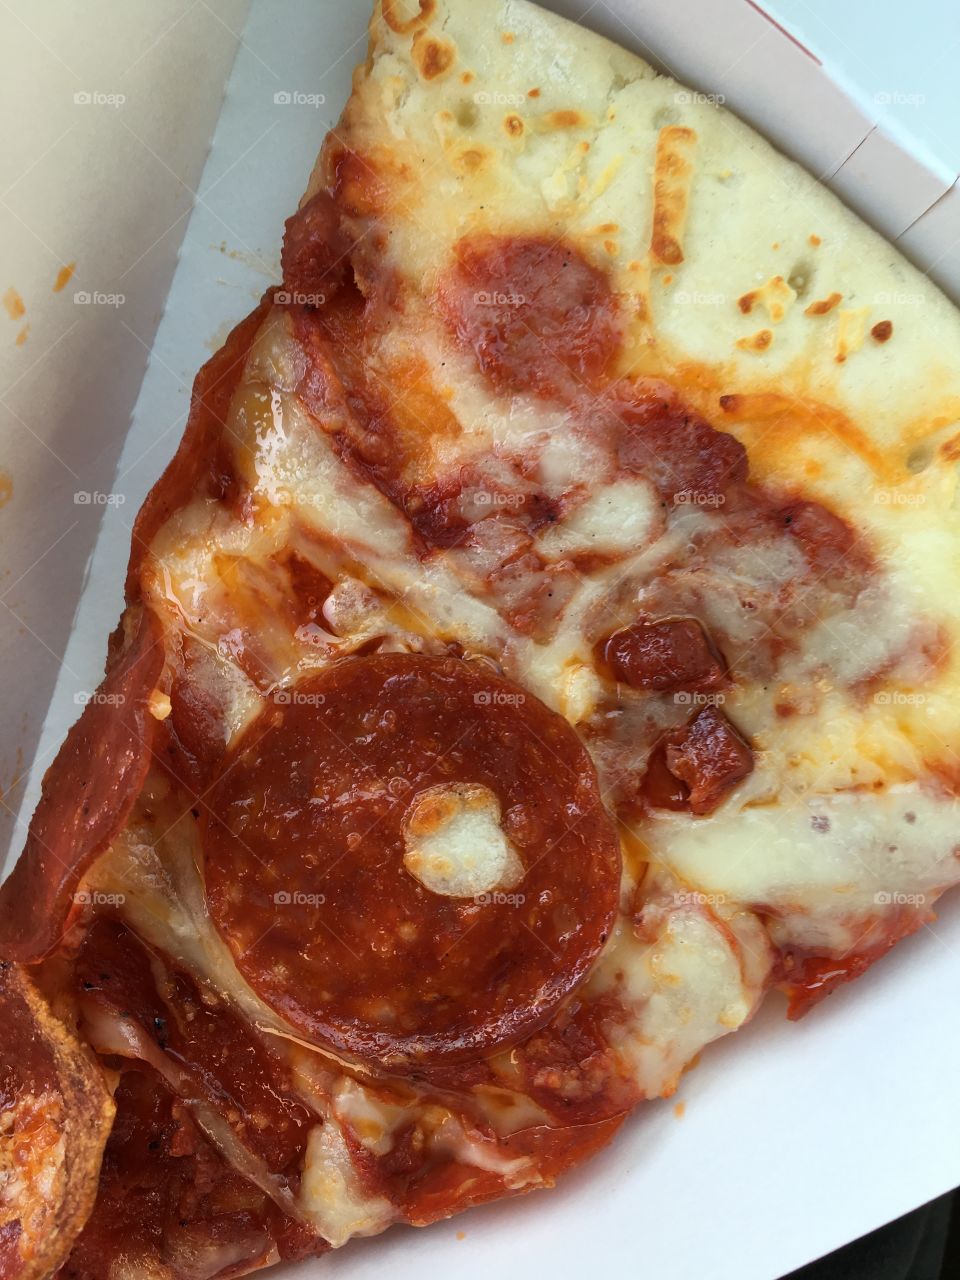 Sometimes 7-Eleven Pizza tops any other choice